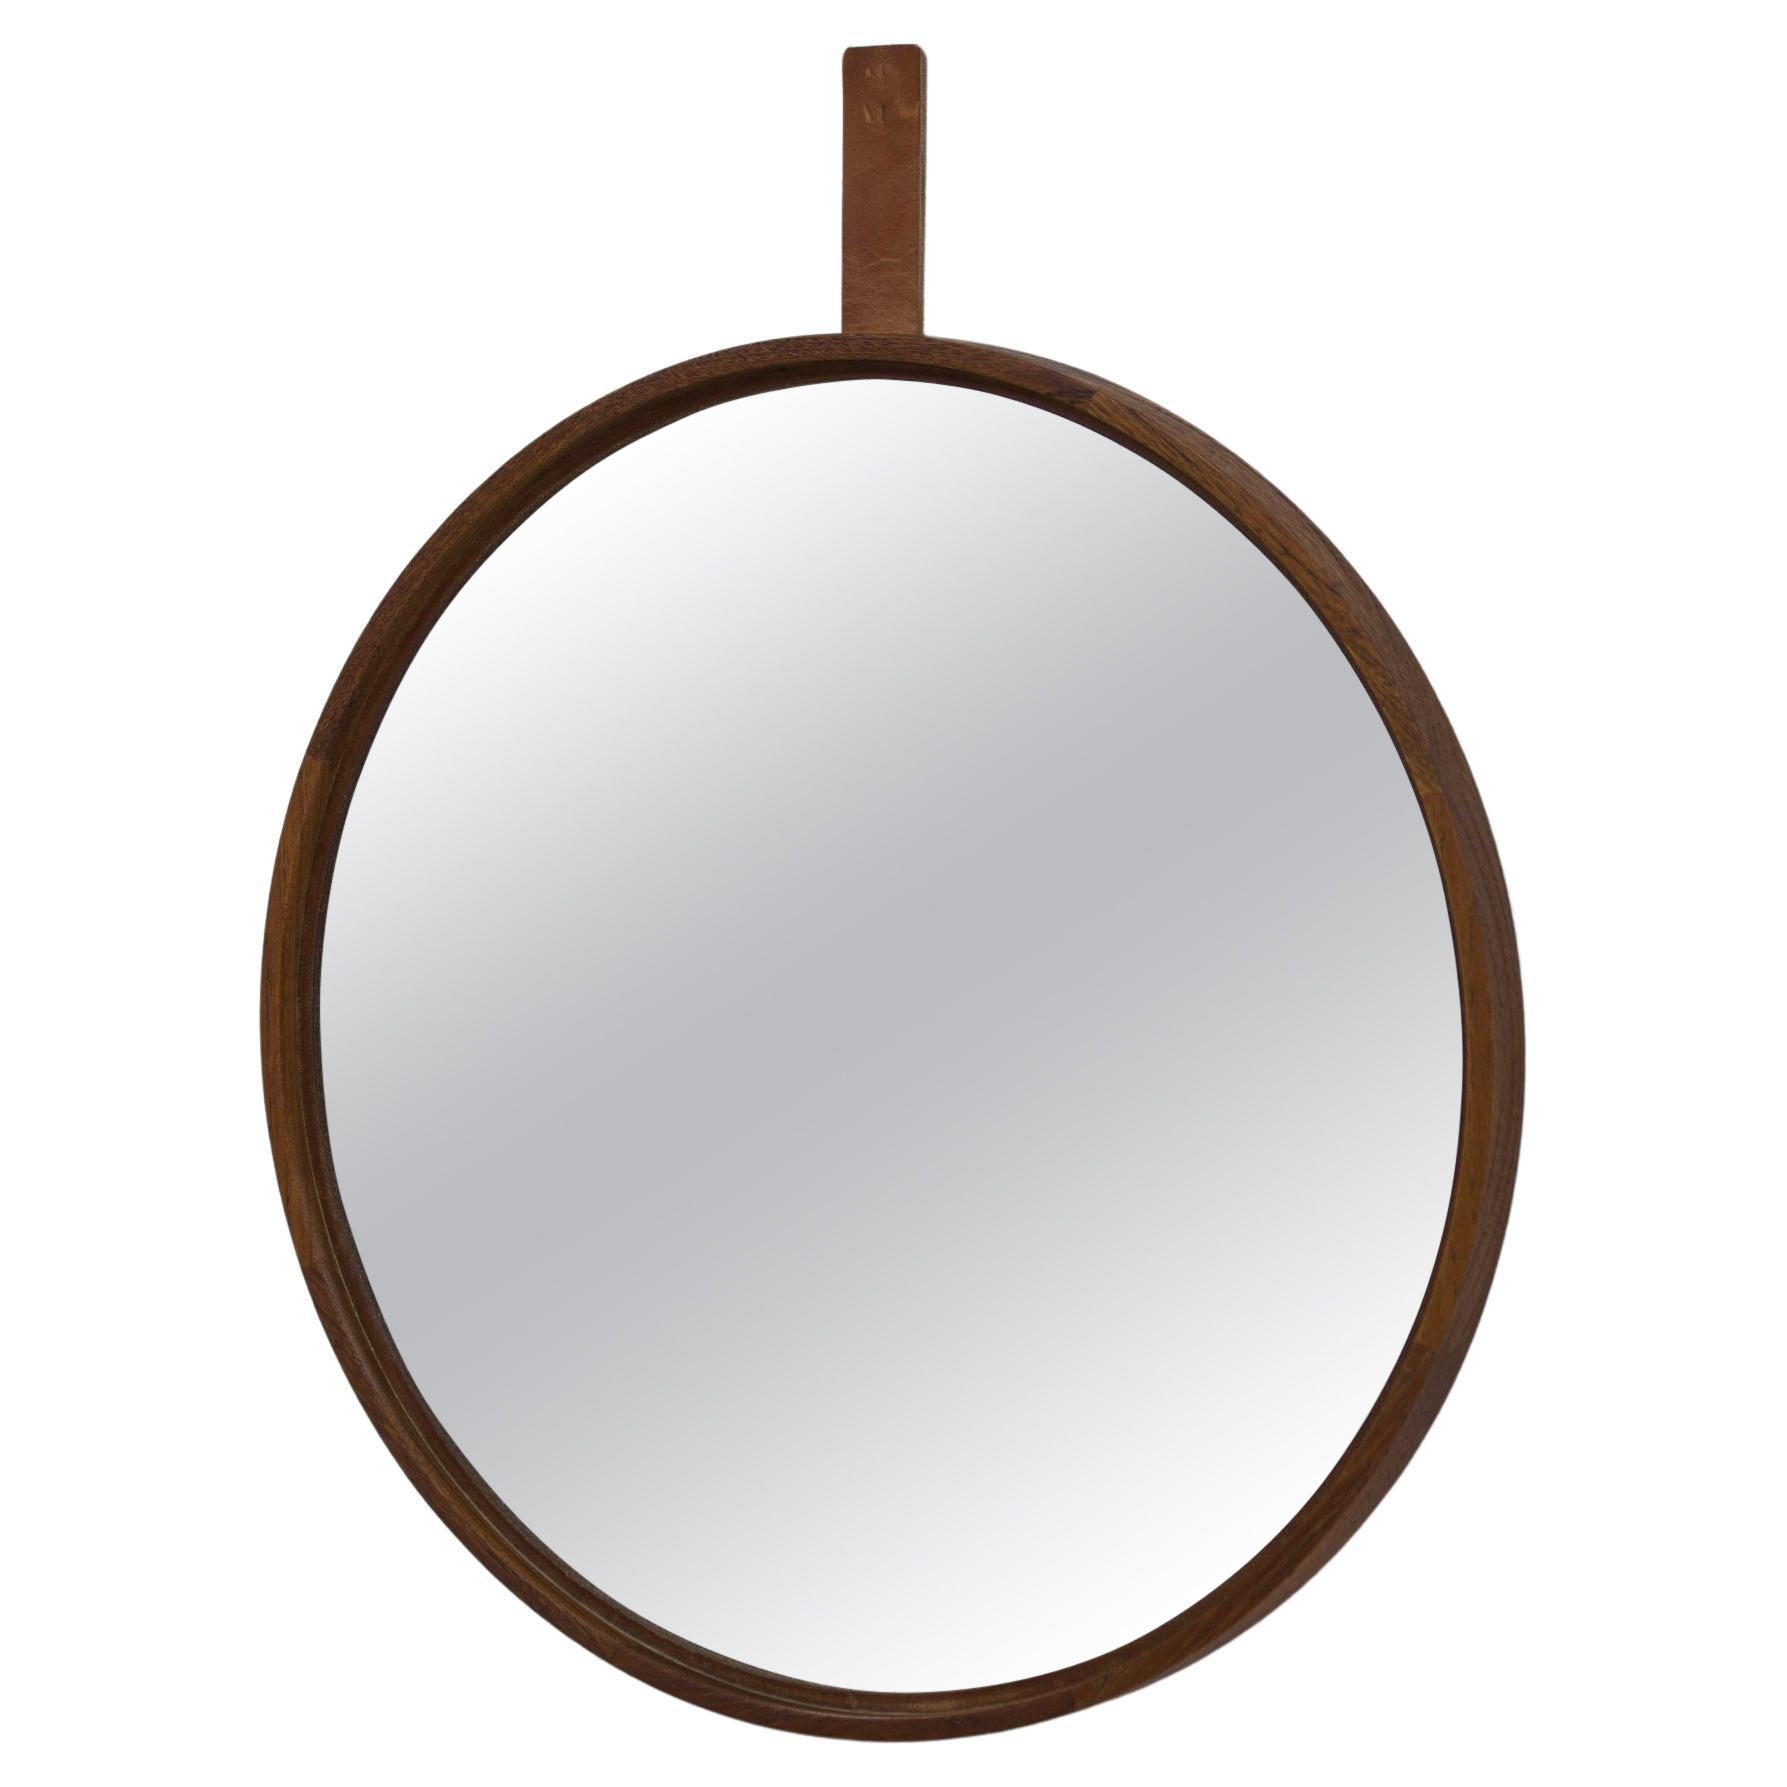 Round teak and leather wall mirror by Uno & Östen Kristiansson. For Sale